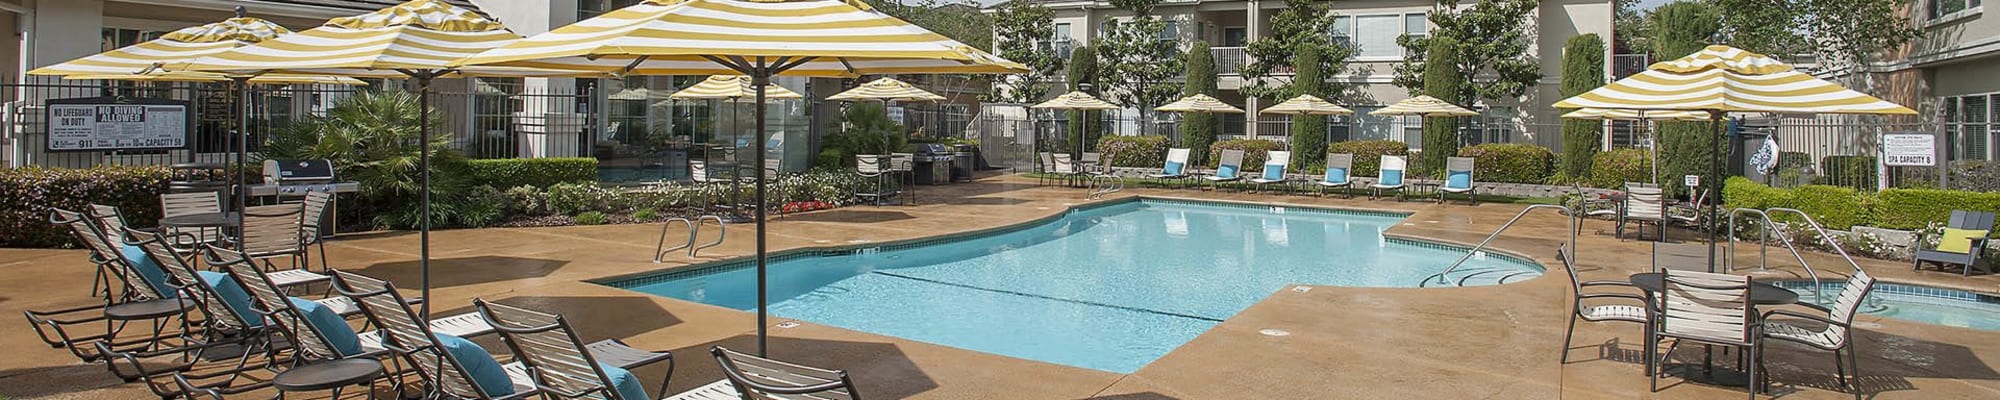 Amenities at Iron Point at Prairie Oaks in Folsom, California